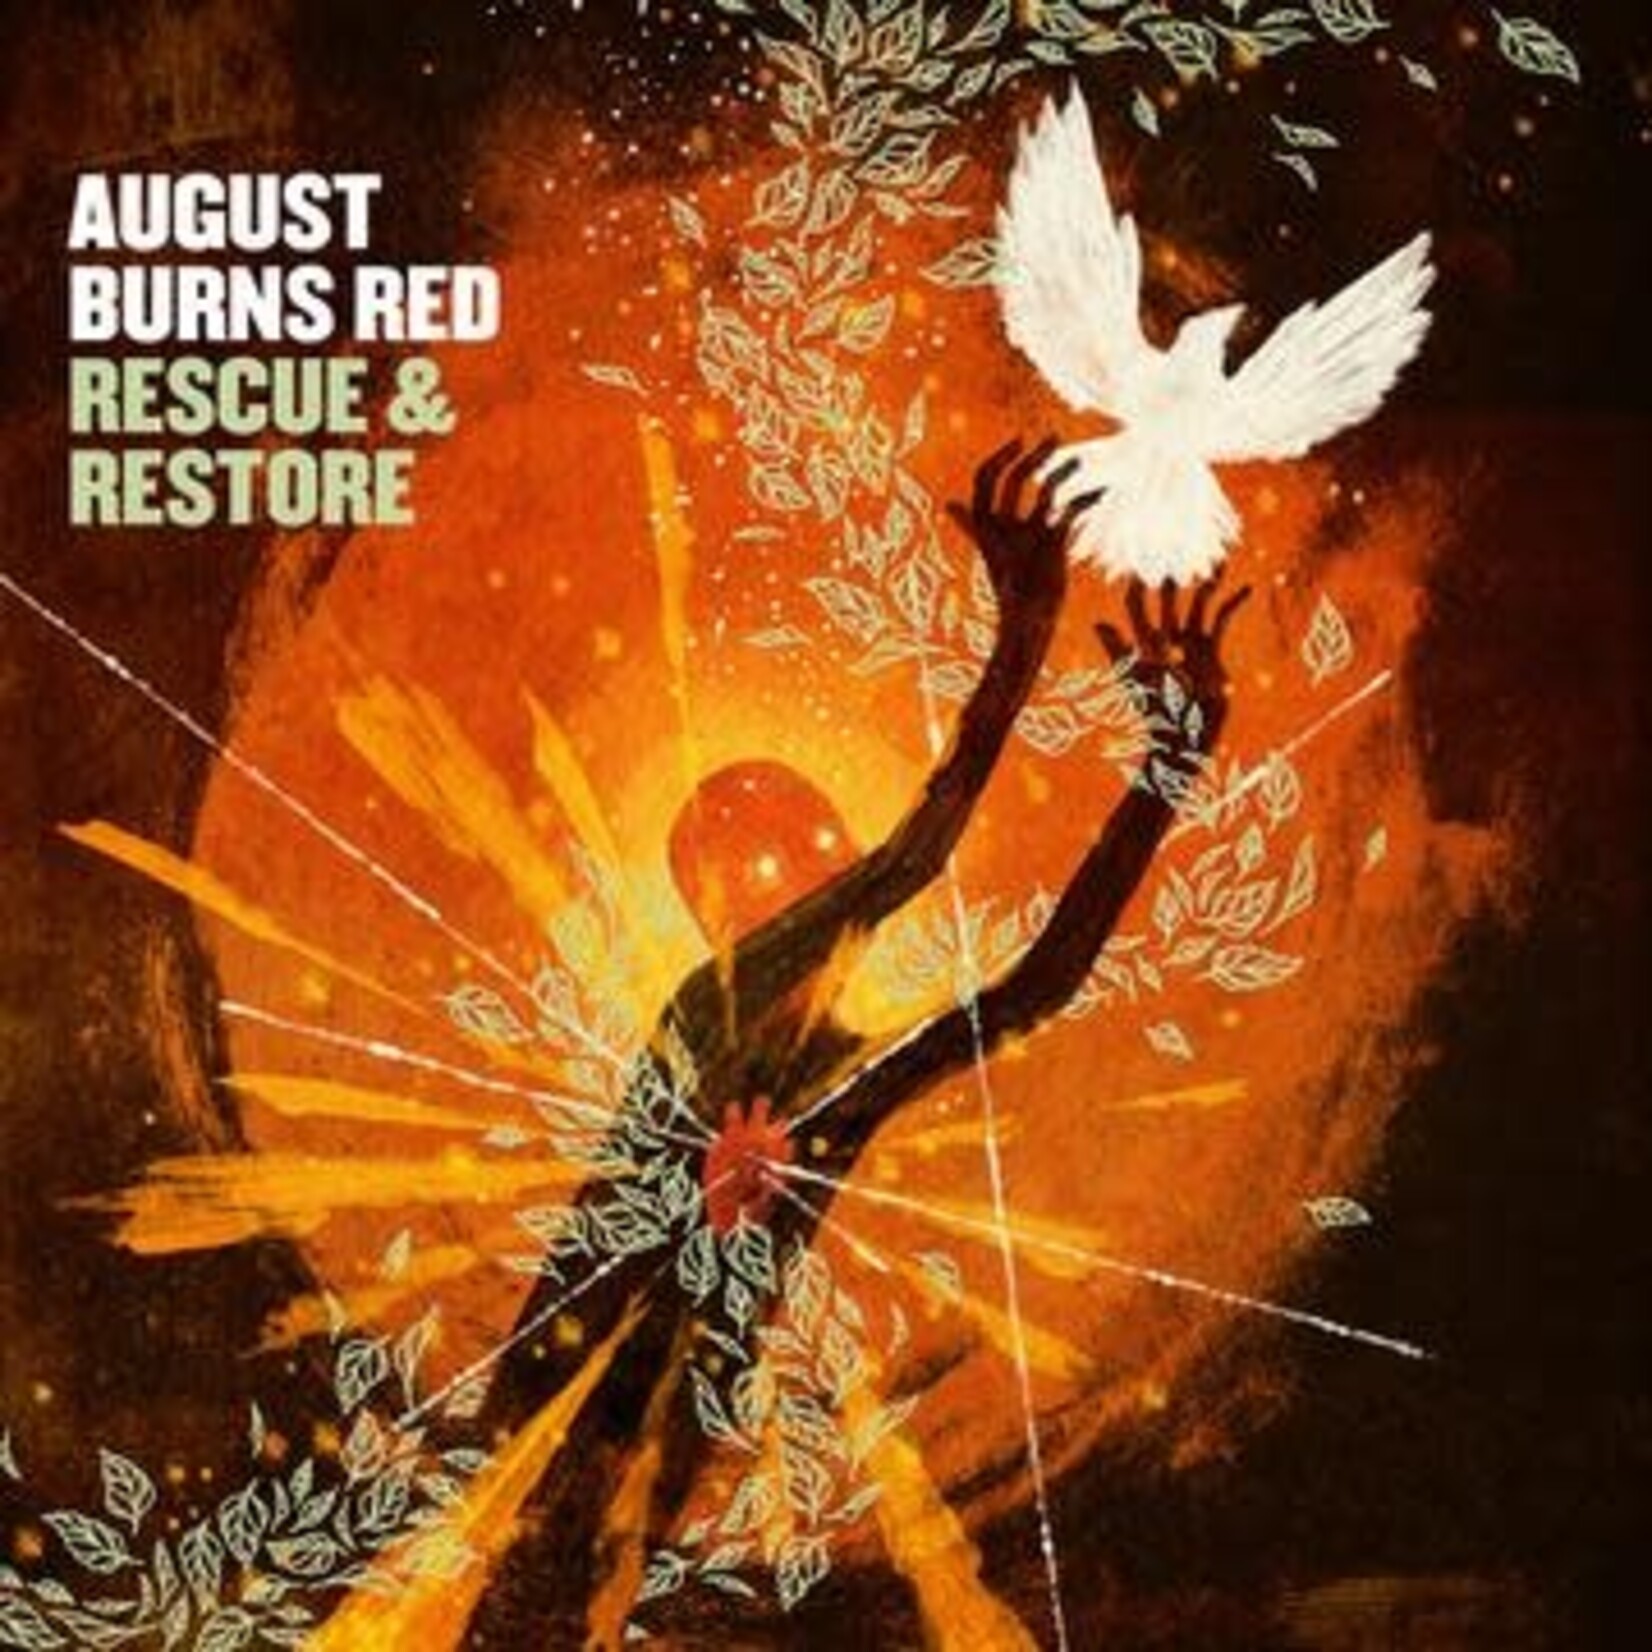 August Burns Red - Rescue & Restore [CD]